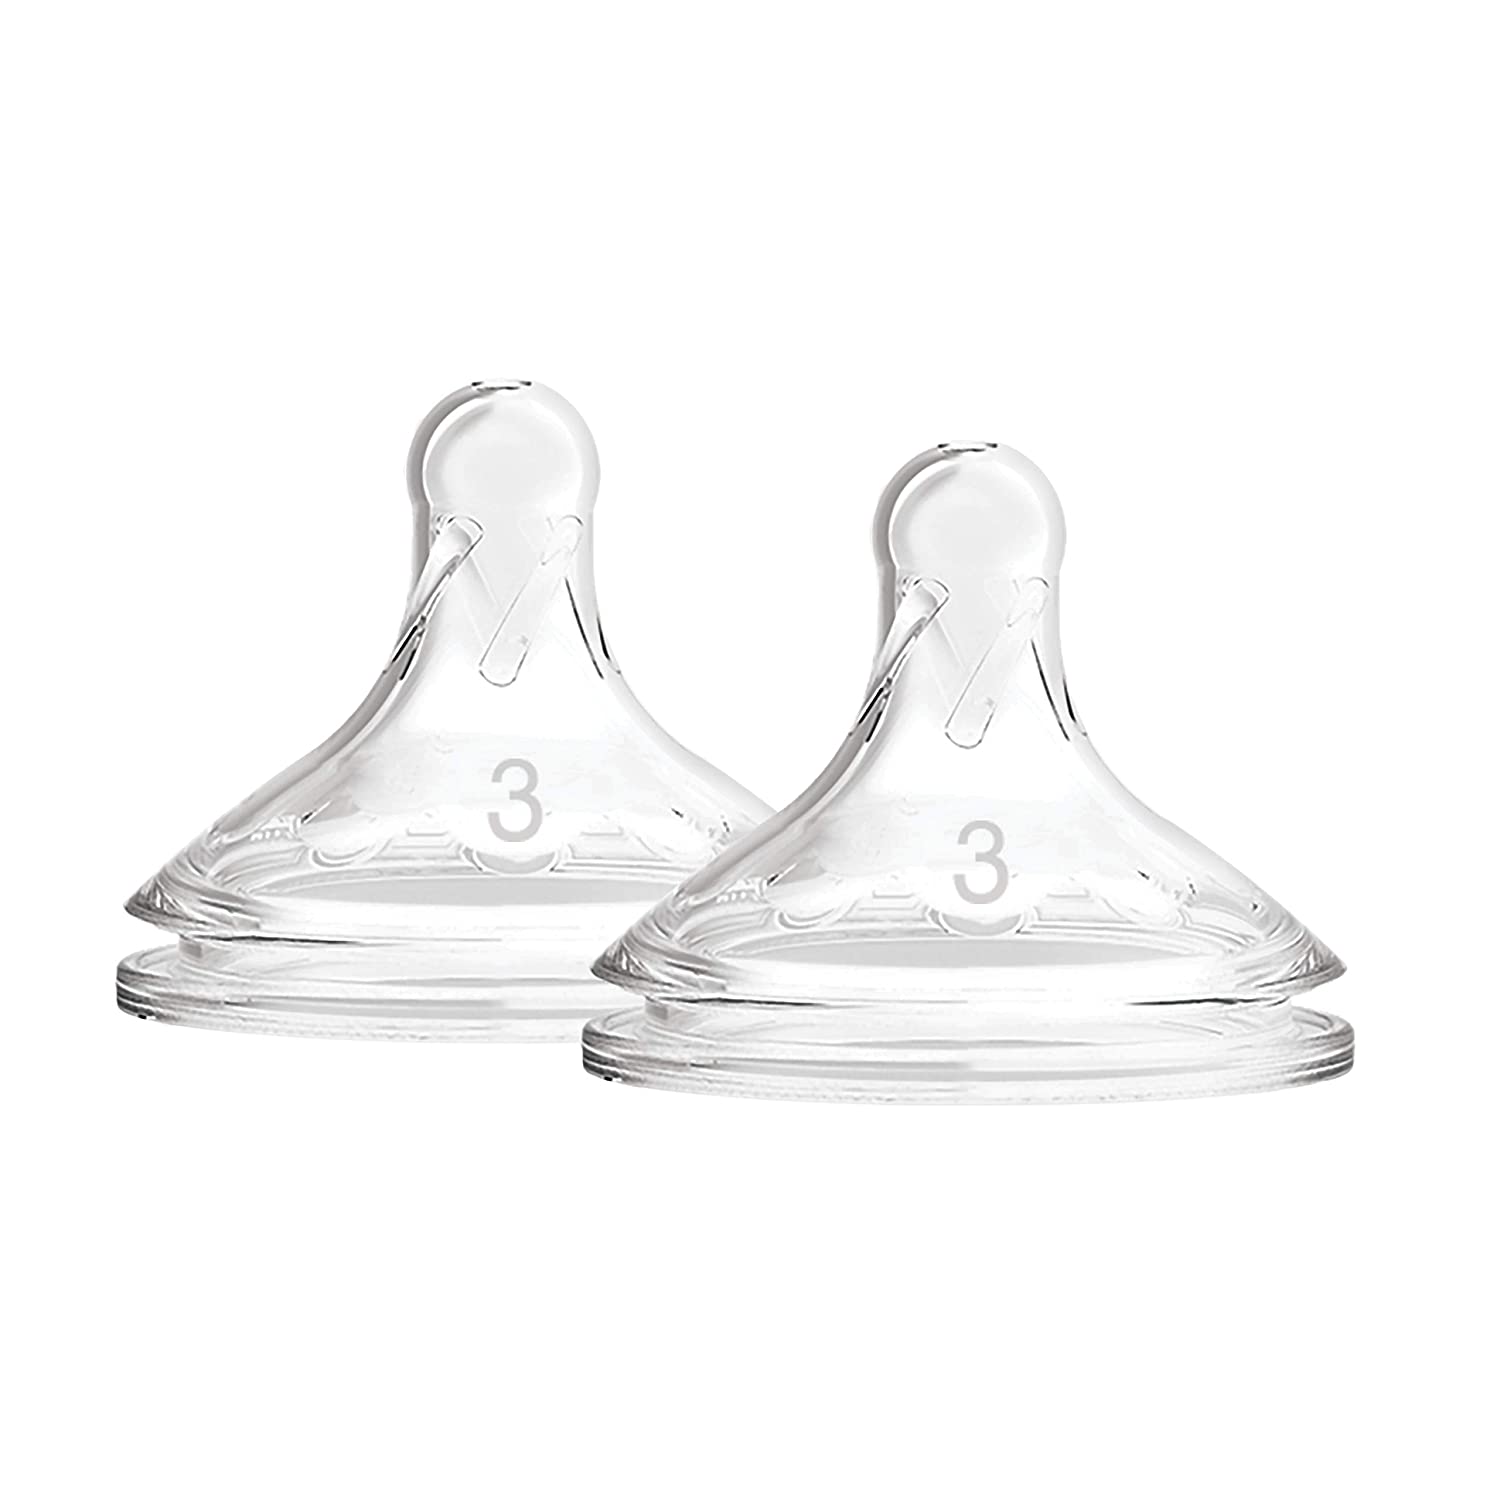 Dr Browns silicon teats(Nipples) wide neck level 3 options+ 2pc, 6 + months